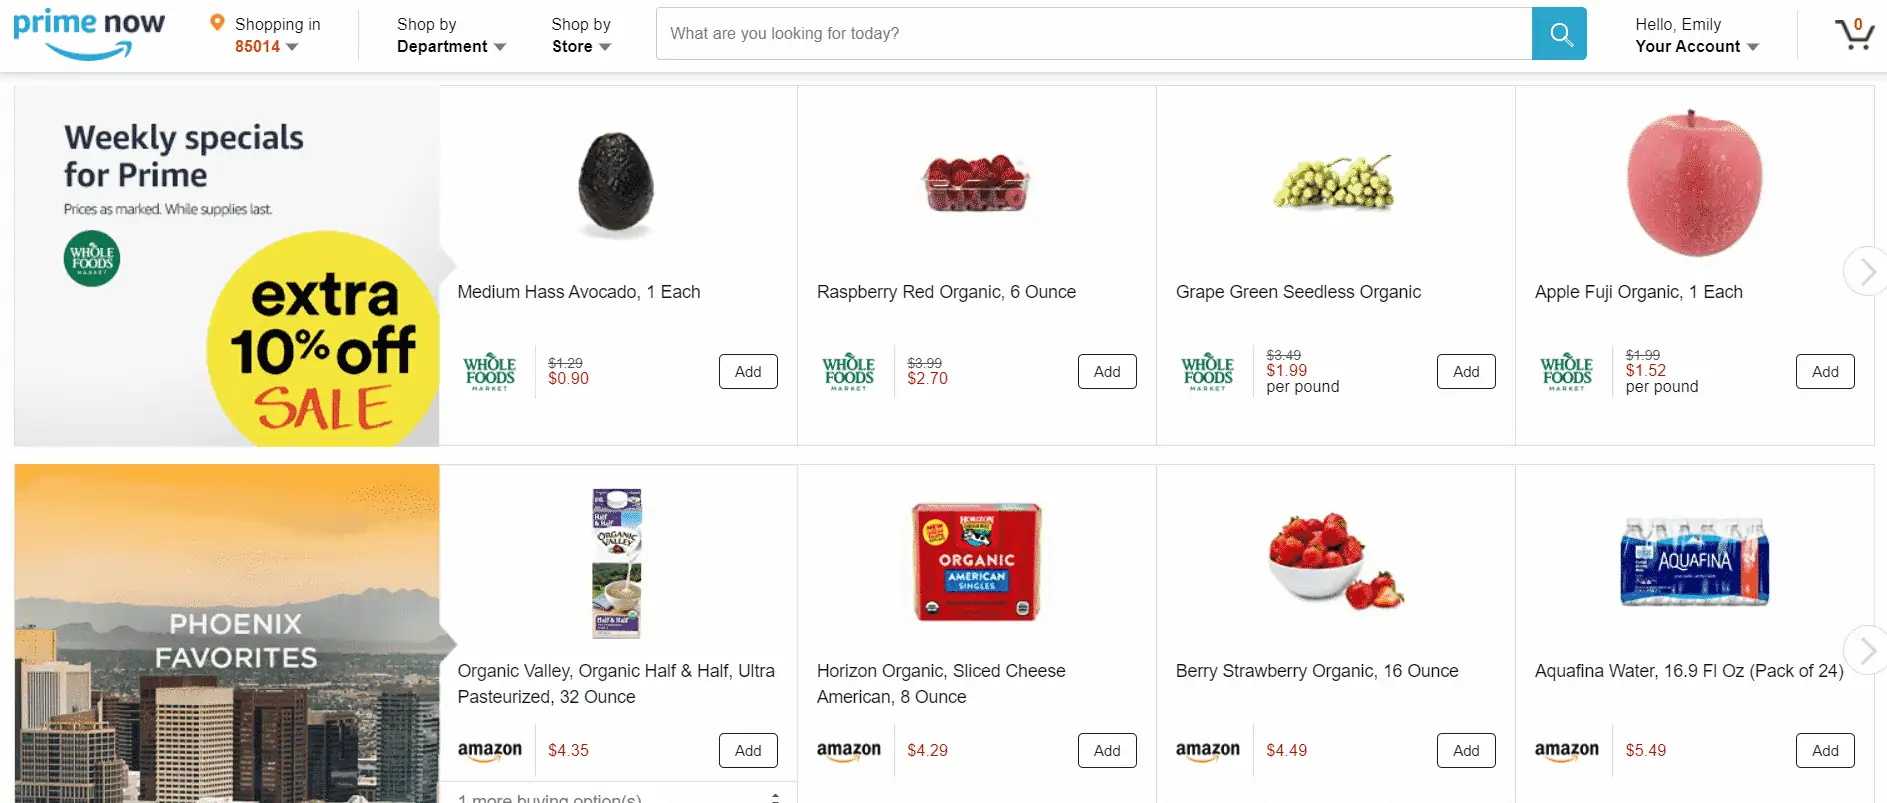 Prime Now items page